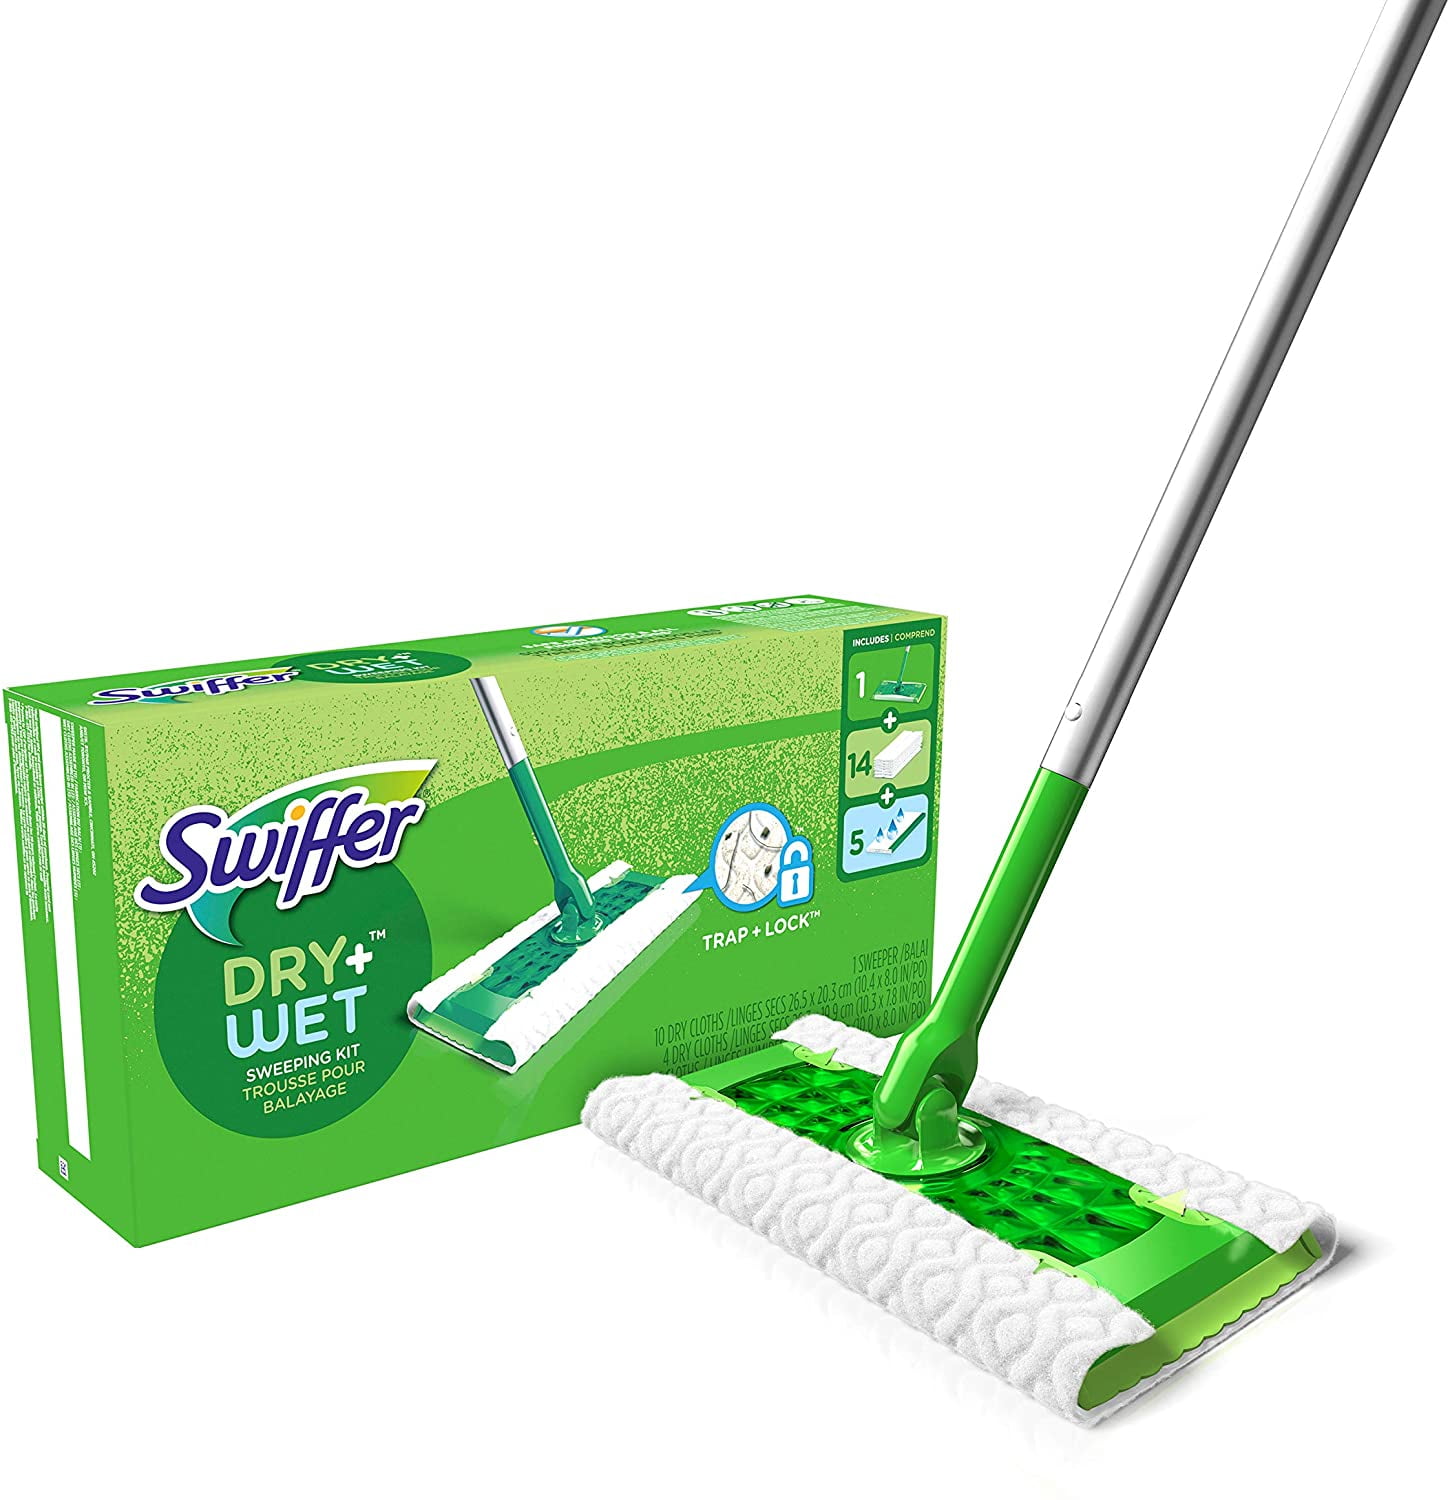 Swiffer Sweeper Dry + Wet All Purpose Floor Mopping and Cleaning Starter Kit with 1 Mop and 10 Refills